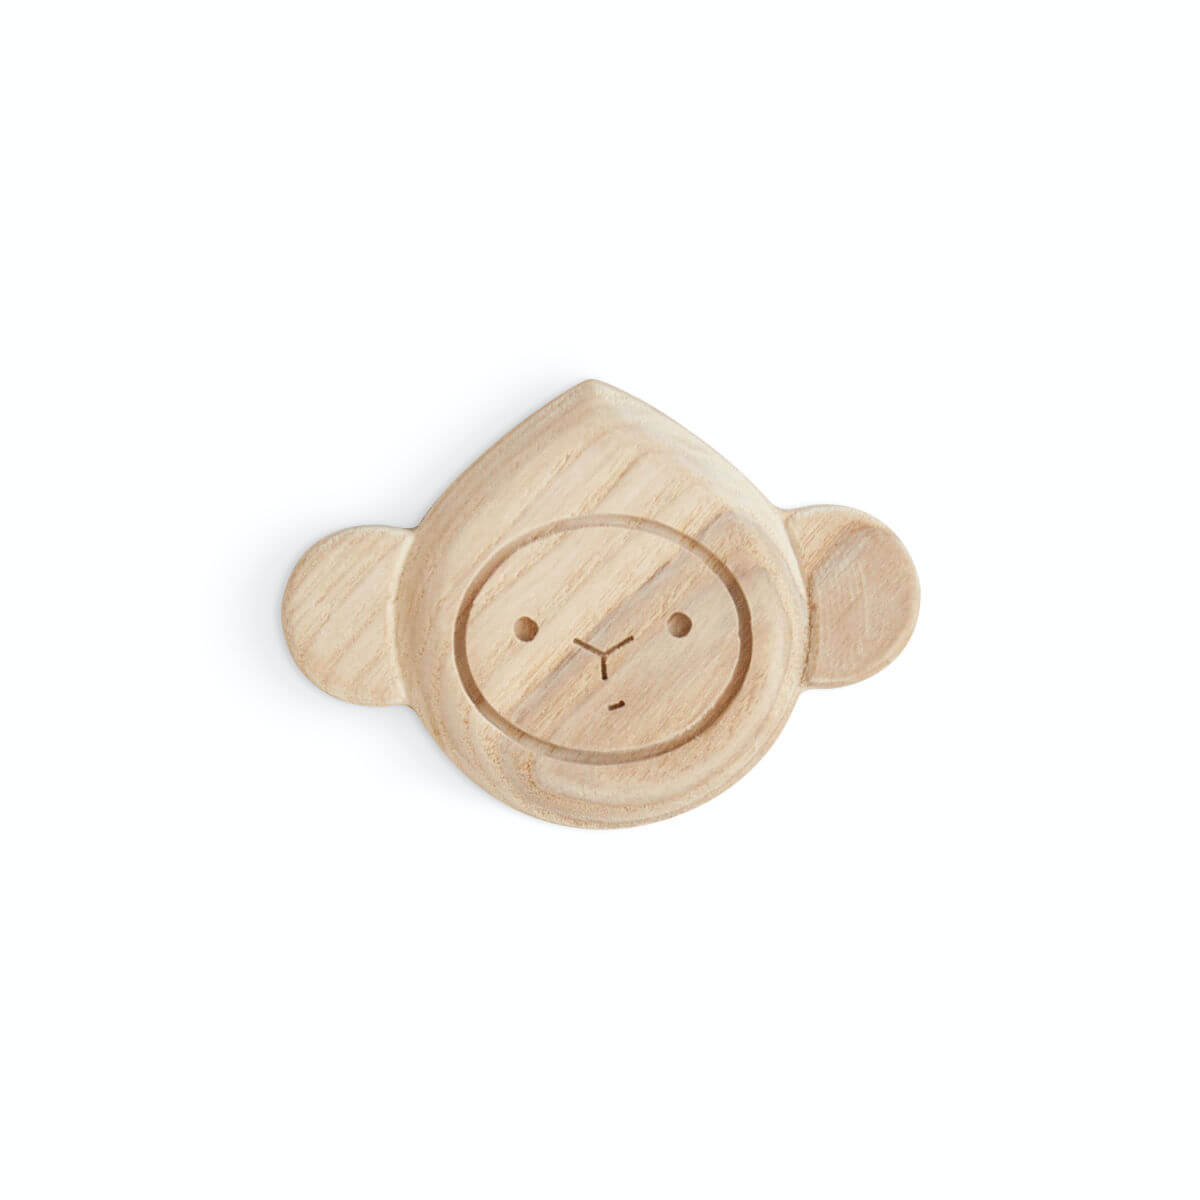 Babai toys monkey wooden baby teething toy and wooden rattle